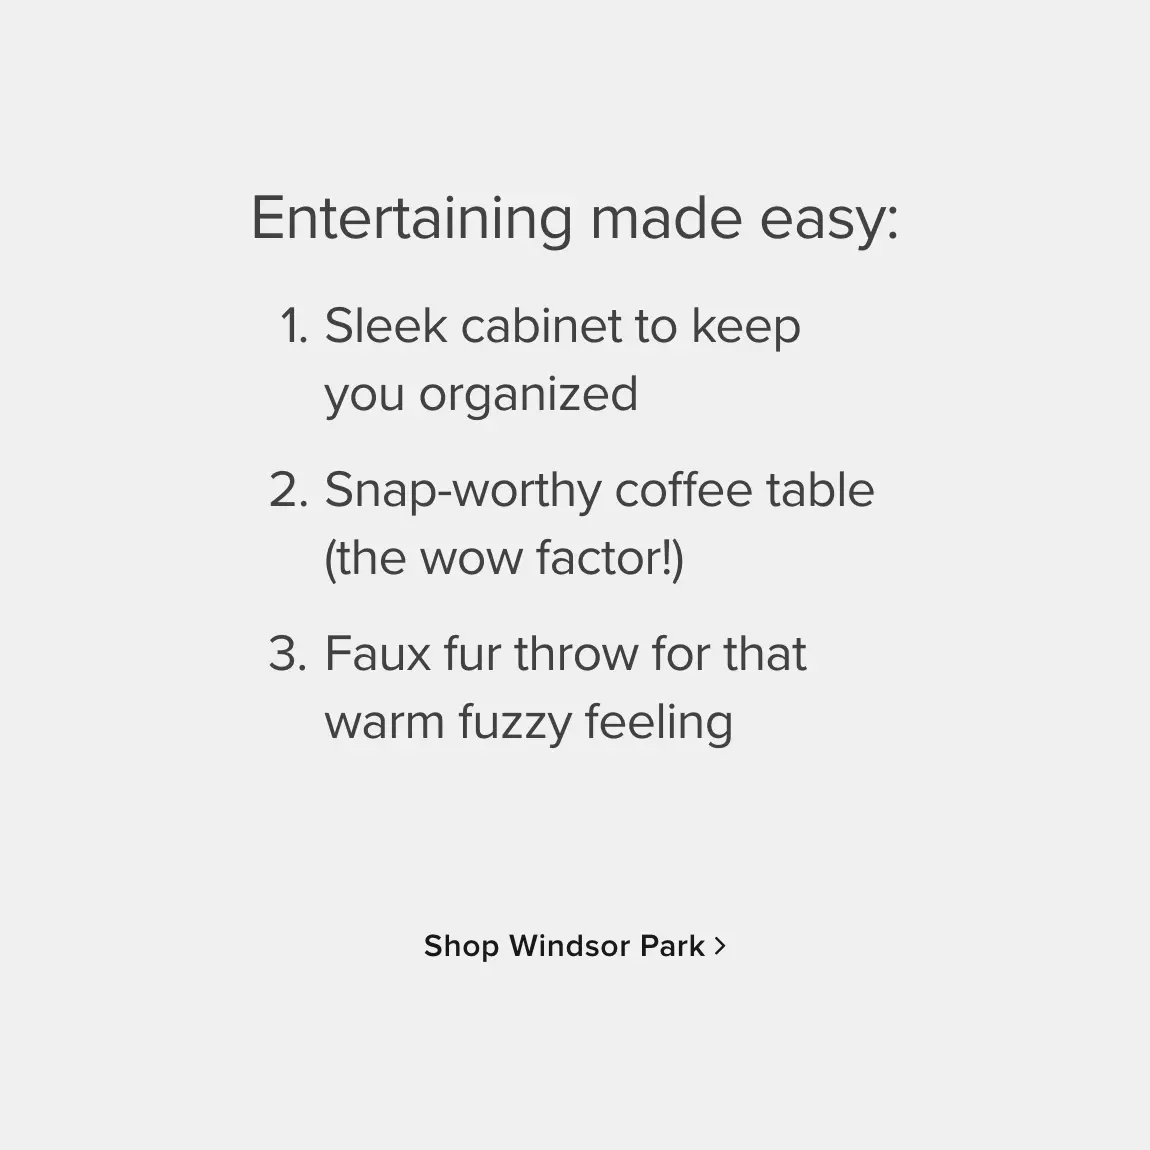 Entertaining made easy: 1.Sleek cabinet to keep you organized | 2.Snap-worthy coffee table (the wowo factor!) | 3. Faux fur throw for that warm fuzzy feeling - Shop Windsor Park